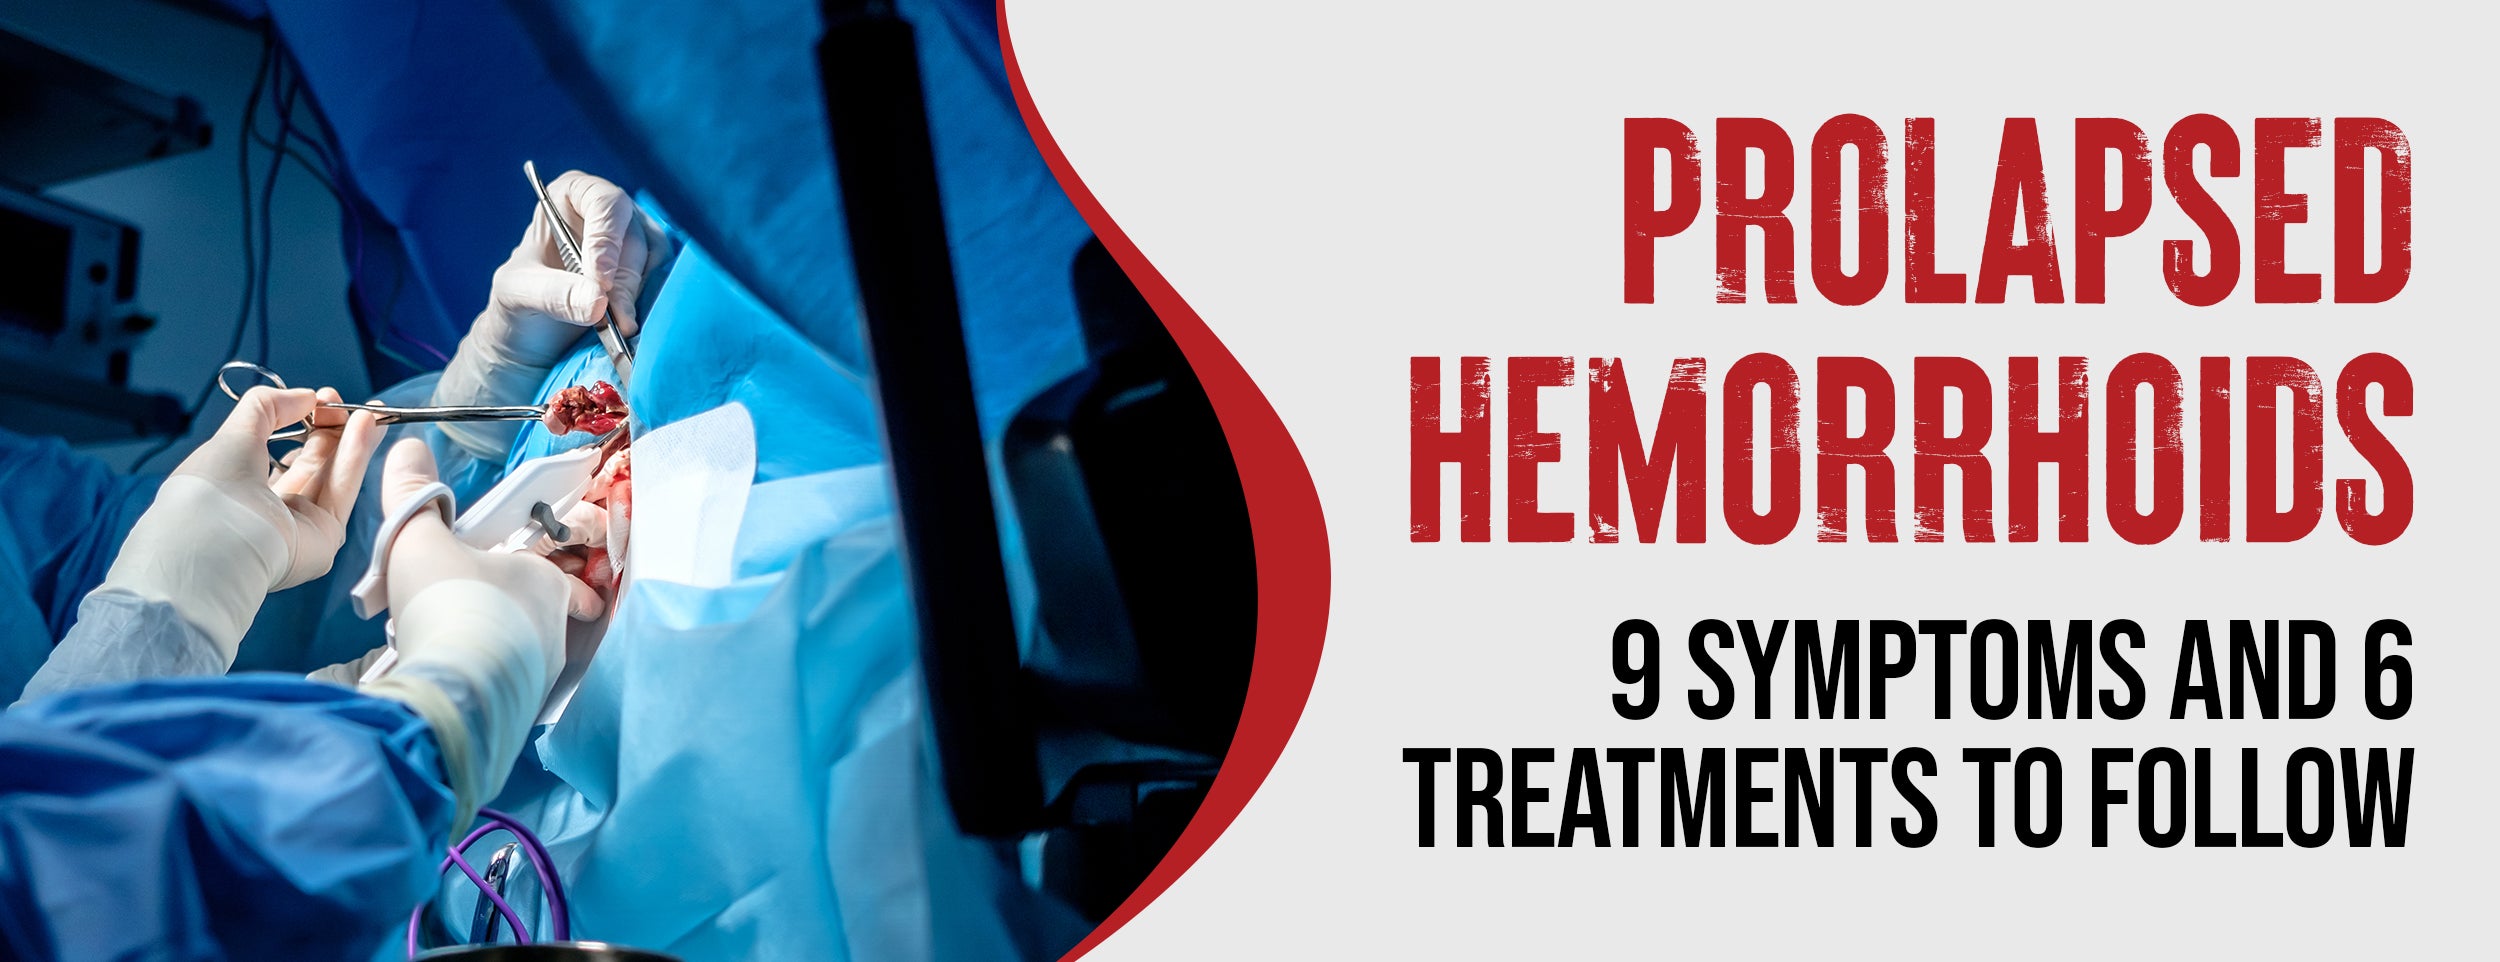 Here are 9 symptoms of prolapsed hemorrhoids, 6 treatments, and how to recover